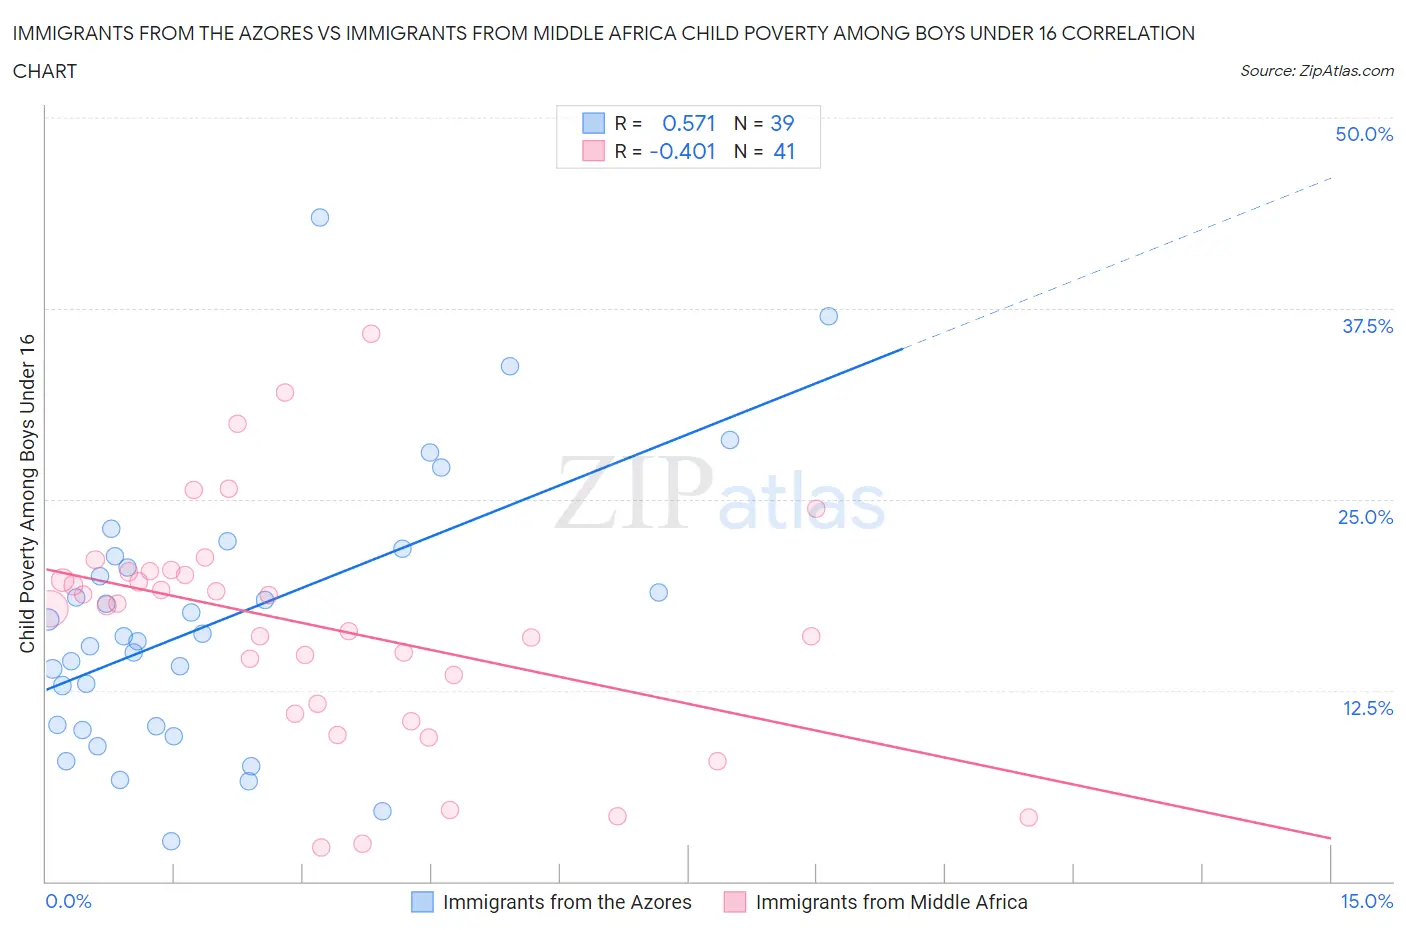 Immigrants from the Azores vs Immigrants from Middle Africa Child Poverty Among Boys Under 16